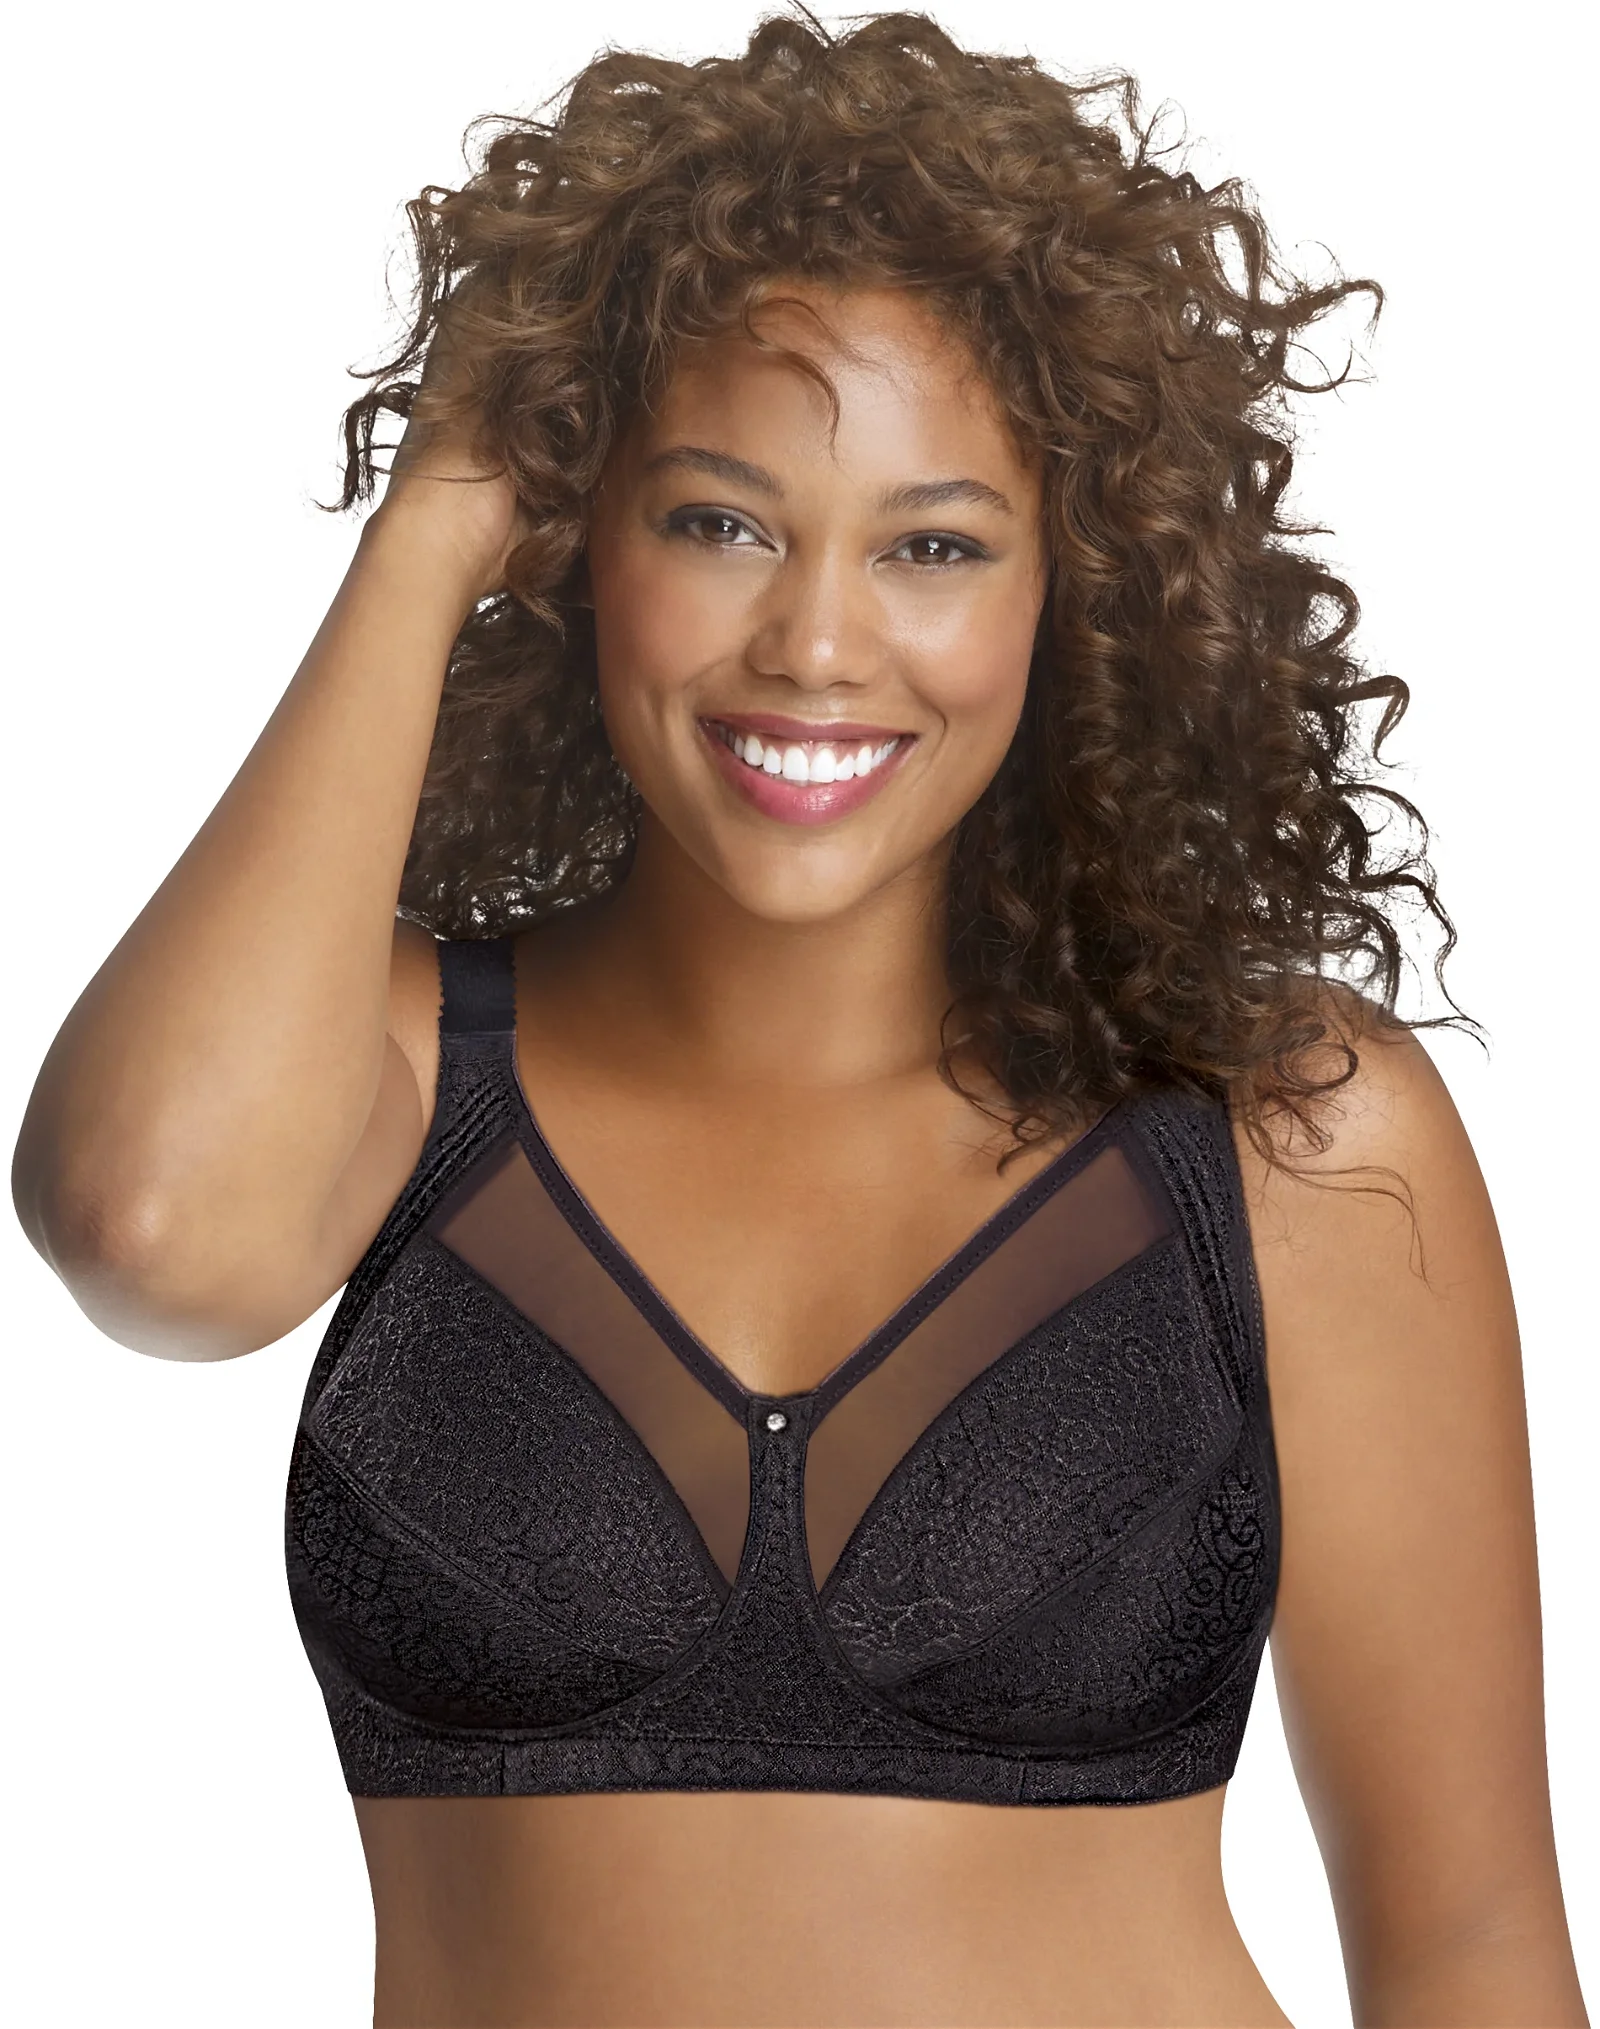 Just My Size Comfort Shaping Wirefree Bra